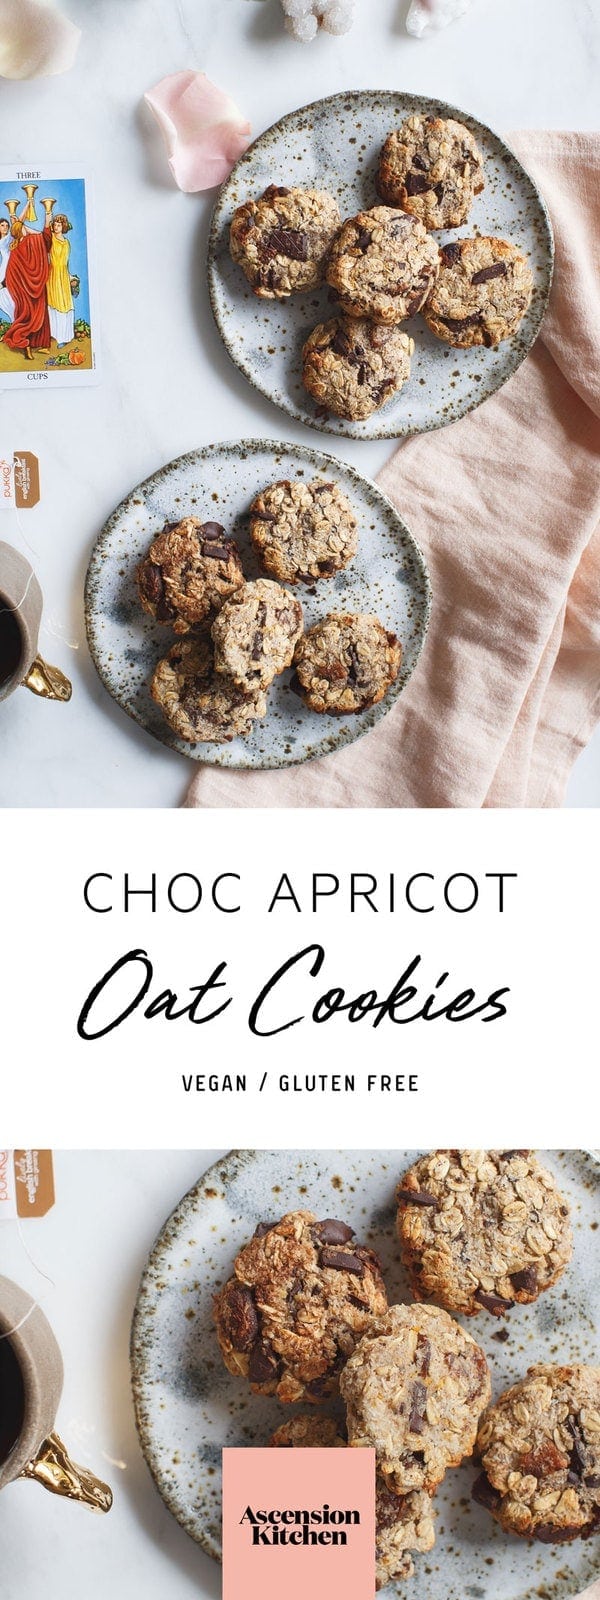 Quick and easy apricot oat cookies with chocolate chunks. Great to make with kids! #Oatcookies #HealthyCookies #Easycookies #vegancookies #glutenfreecookies #apricot #banana #AscensionKitchen   // Pin to your own inspiration board! //